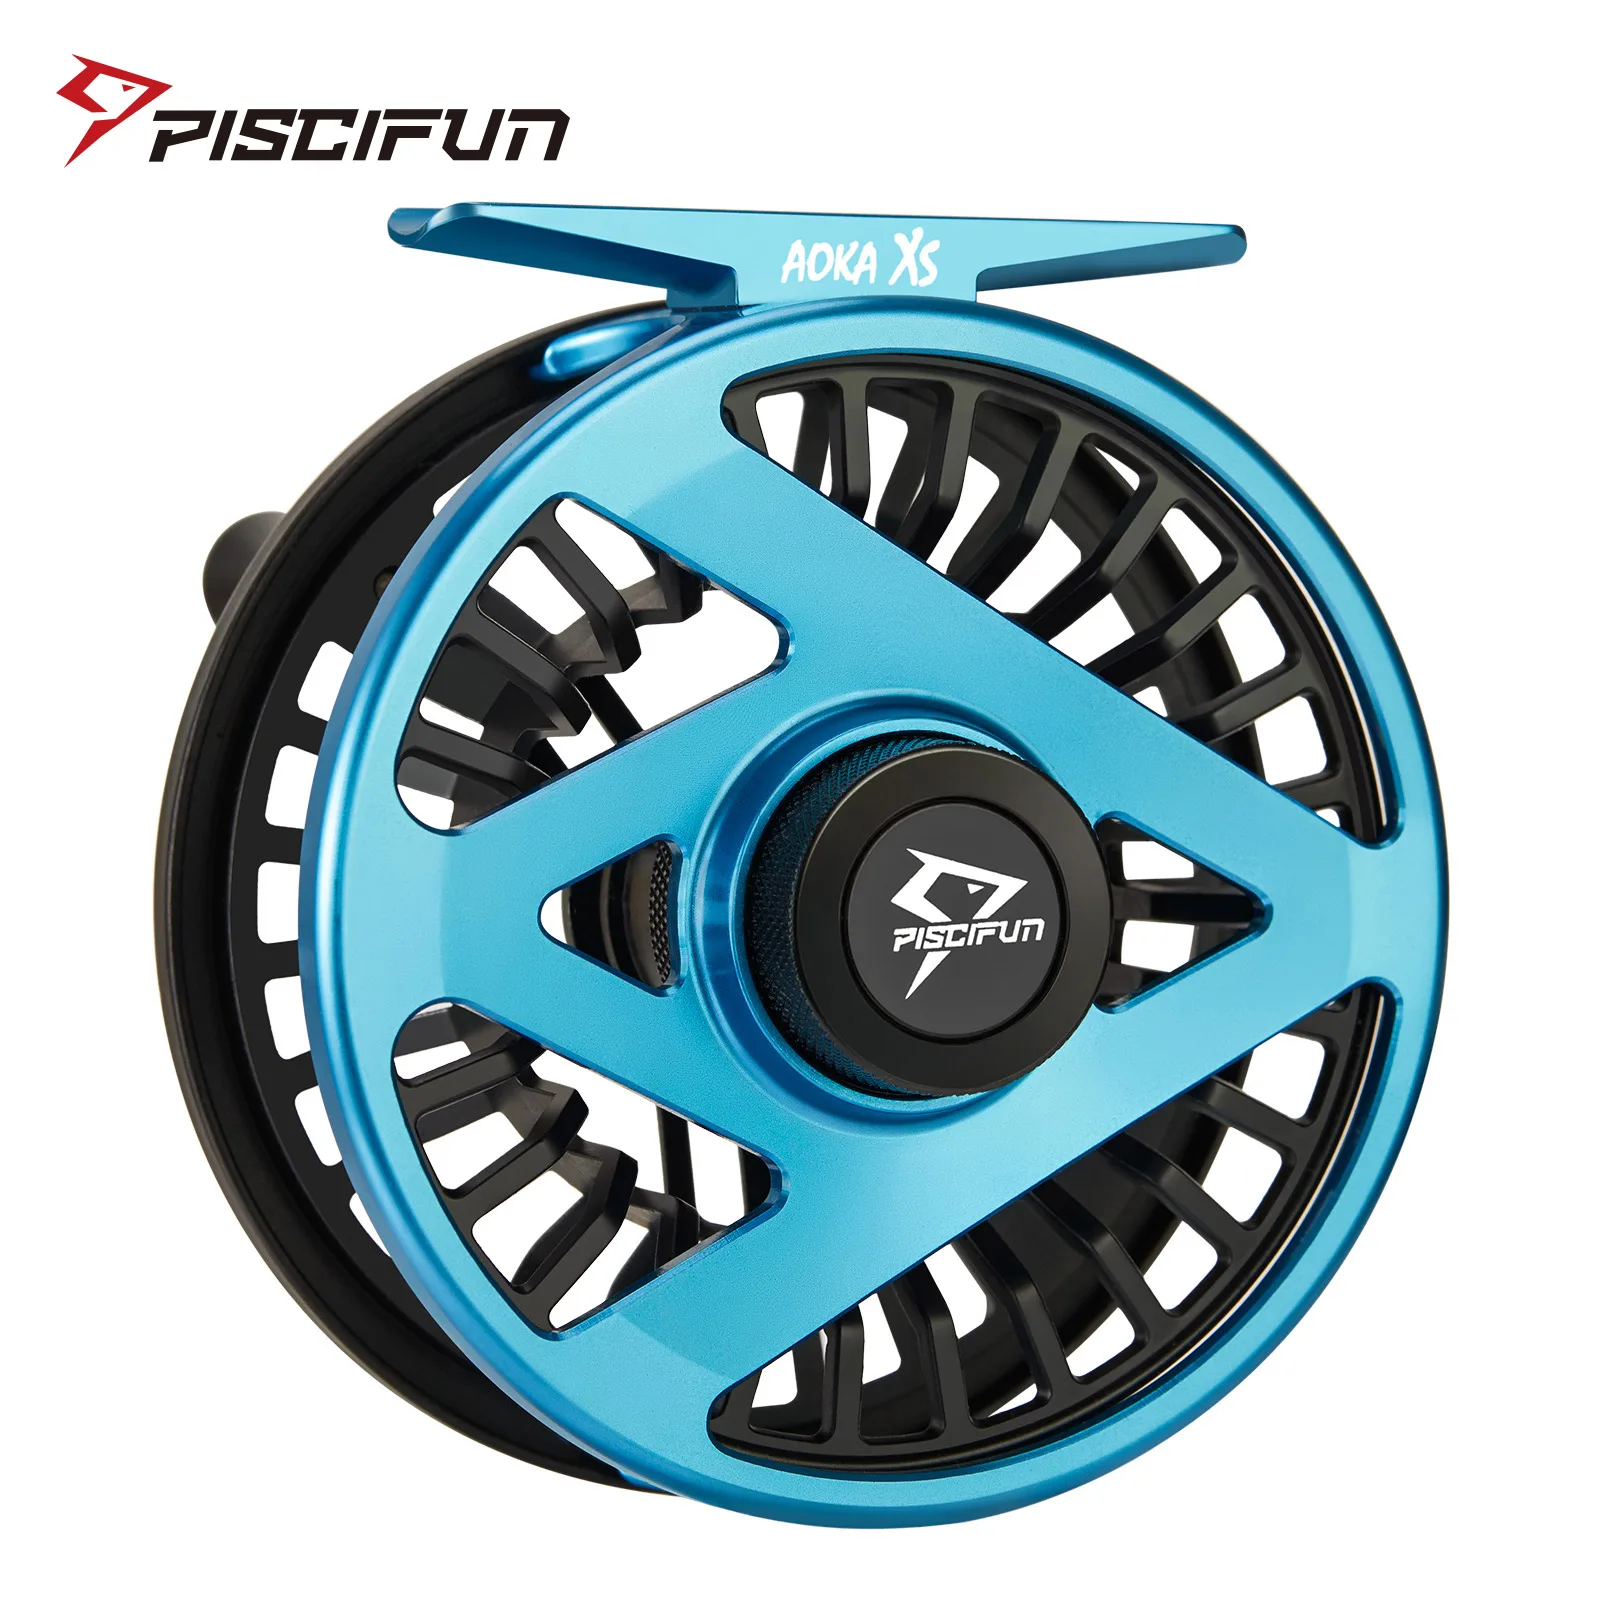 

Piscifun AOKA XS Fly Fishing Reel Alumimum Alloy Body Sealed Double Click Carbon Fiber Drag System CNC Machined (Blue)